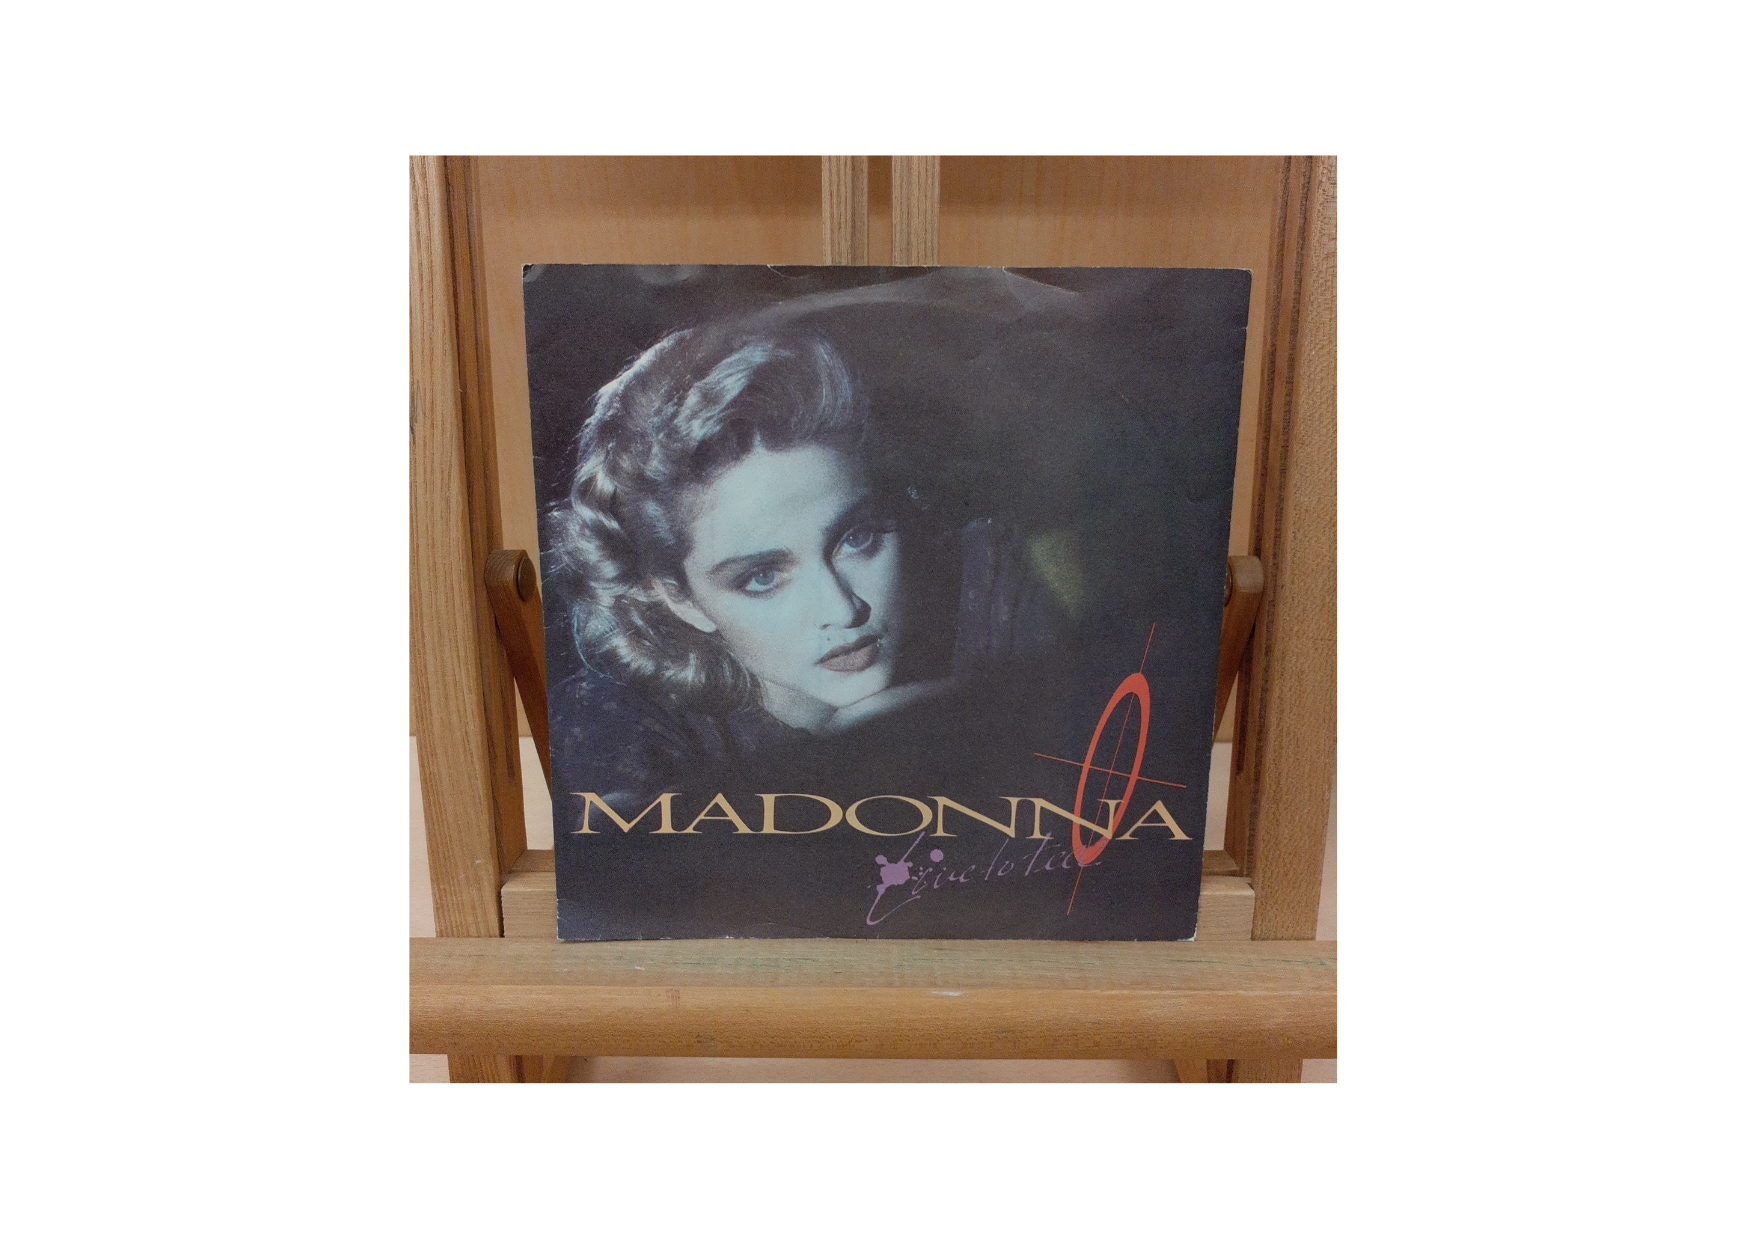 Madonna Live To Tell Front View 7" Single